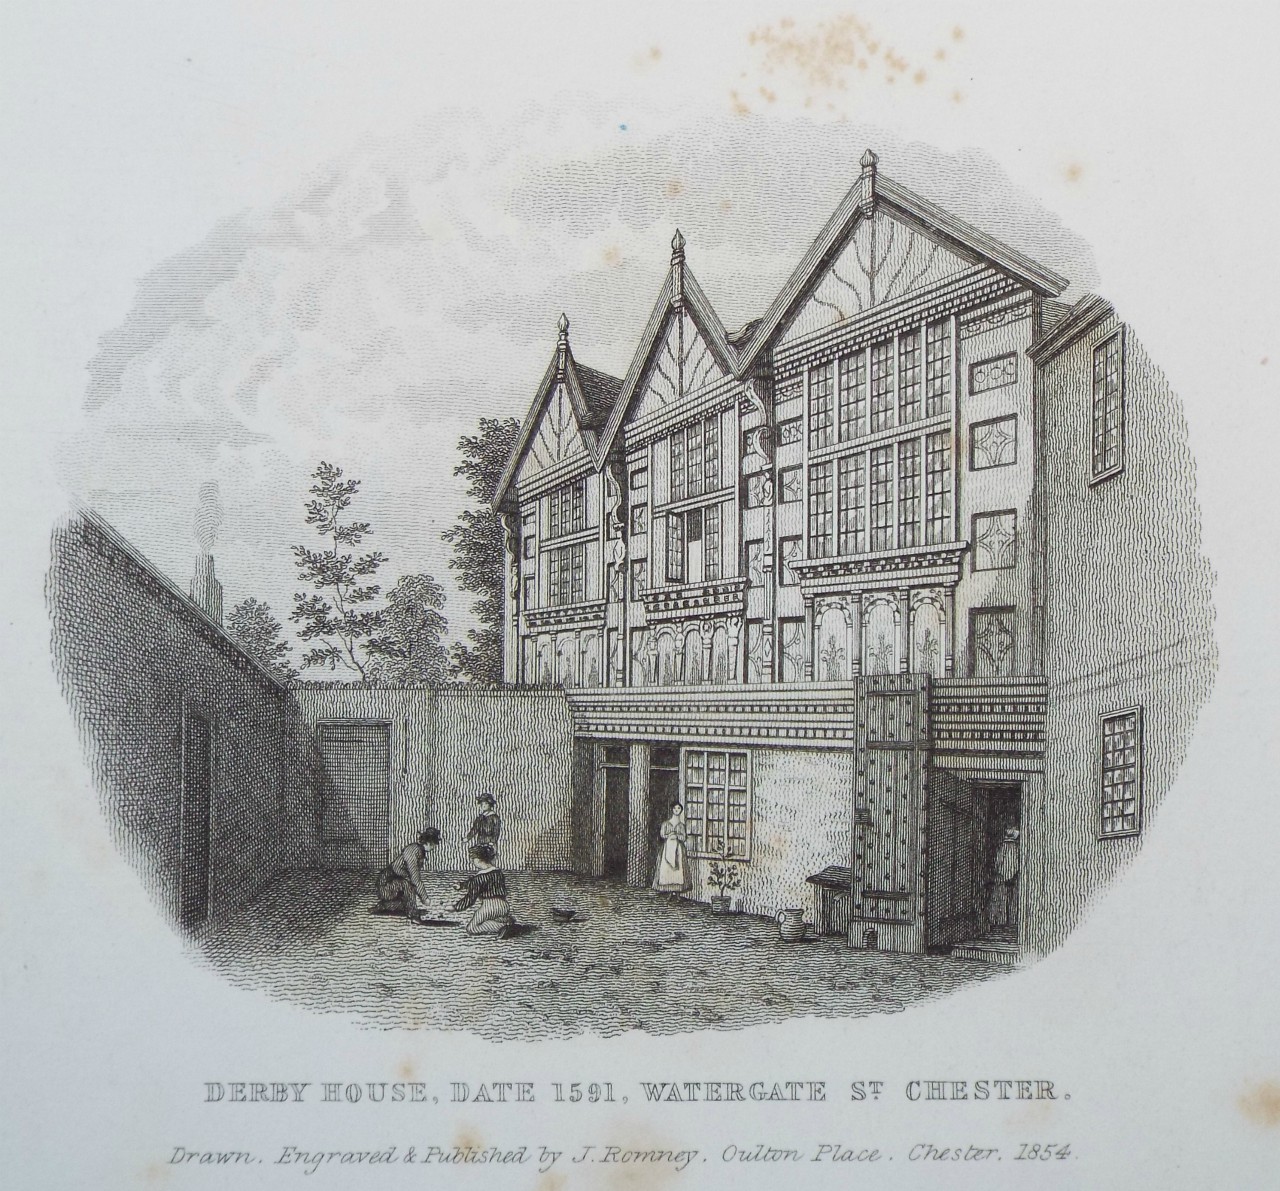 Print - Derby House, Date 1591, Watergate St. Chester. - Romney